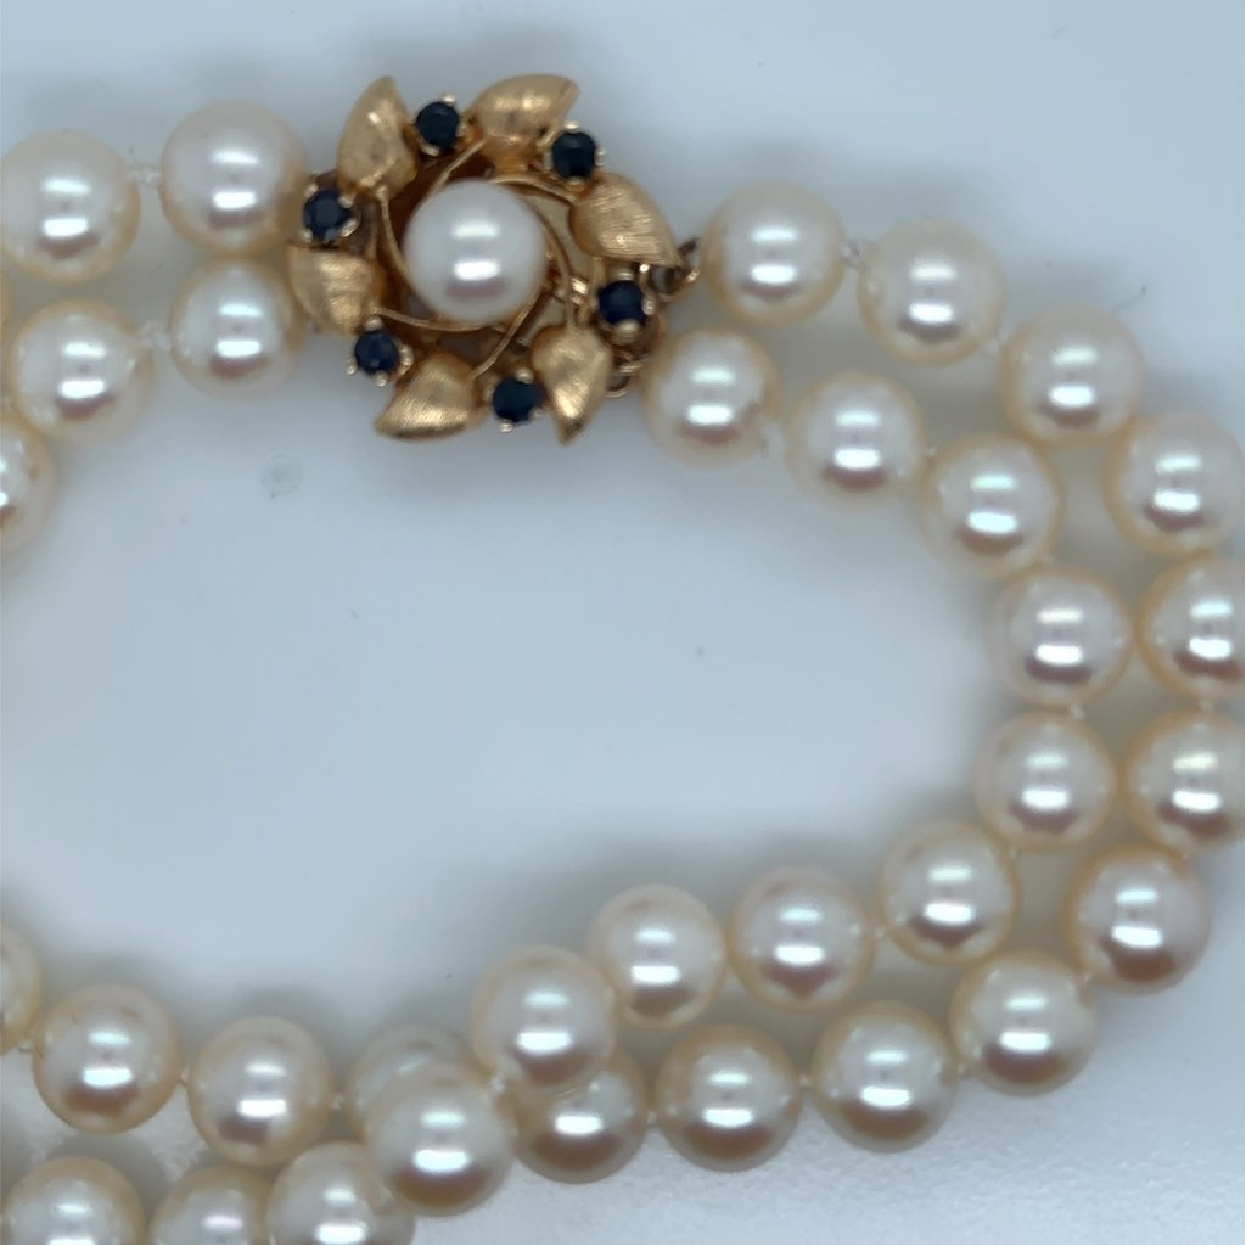 7 Inch Double Strand Acoya Pearl Bracelet with 14K Yellow Gold and Sapphire Clasp